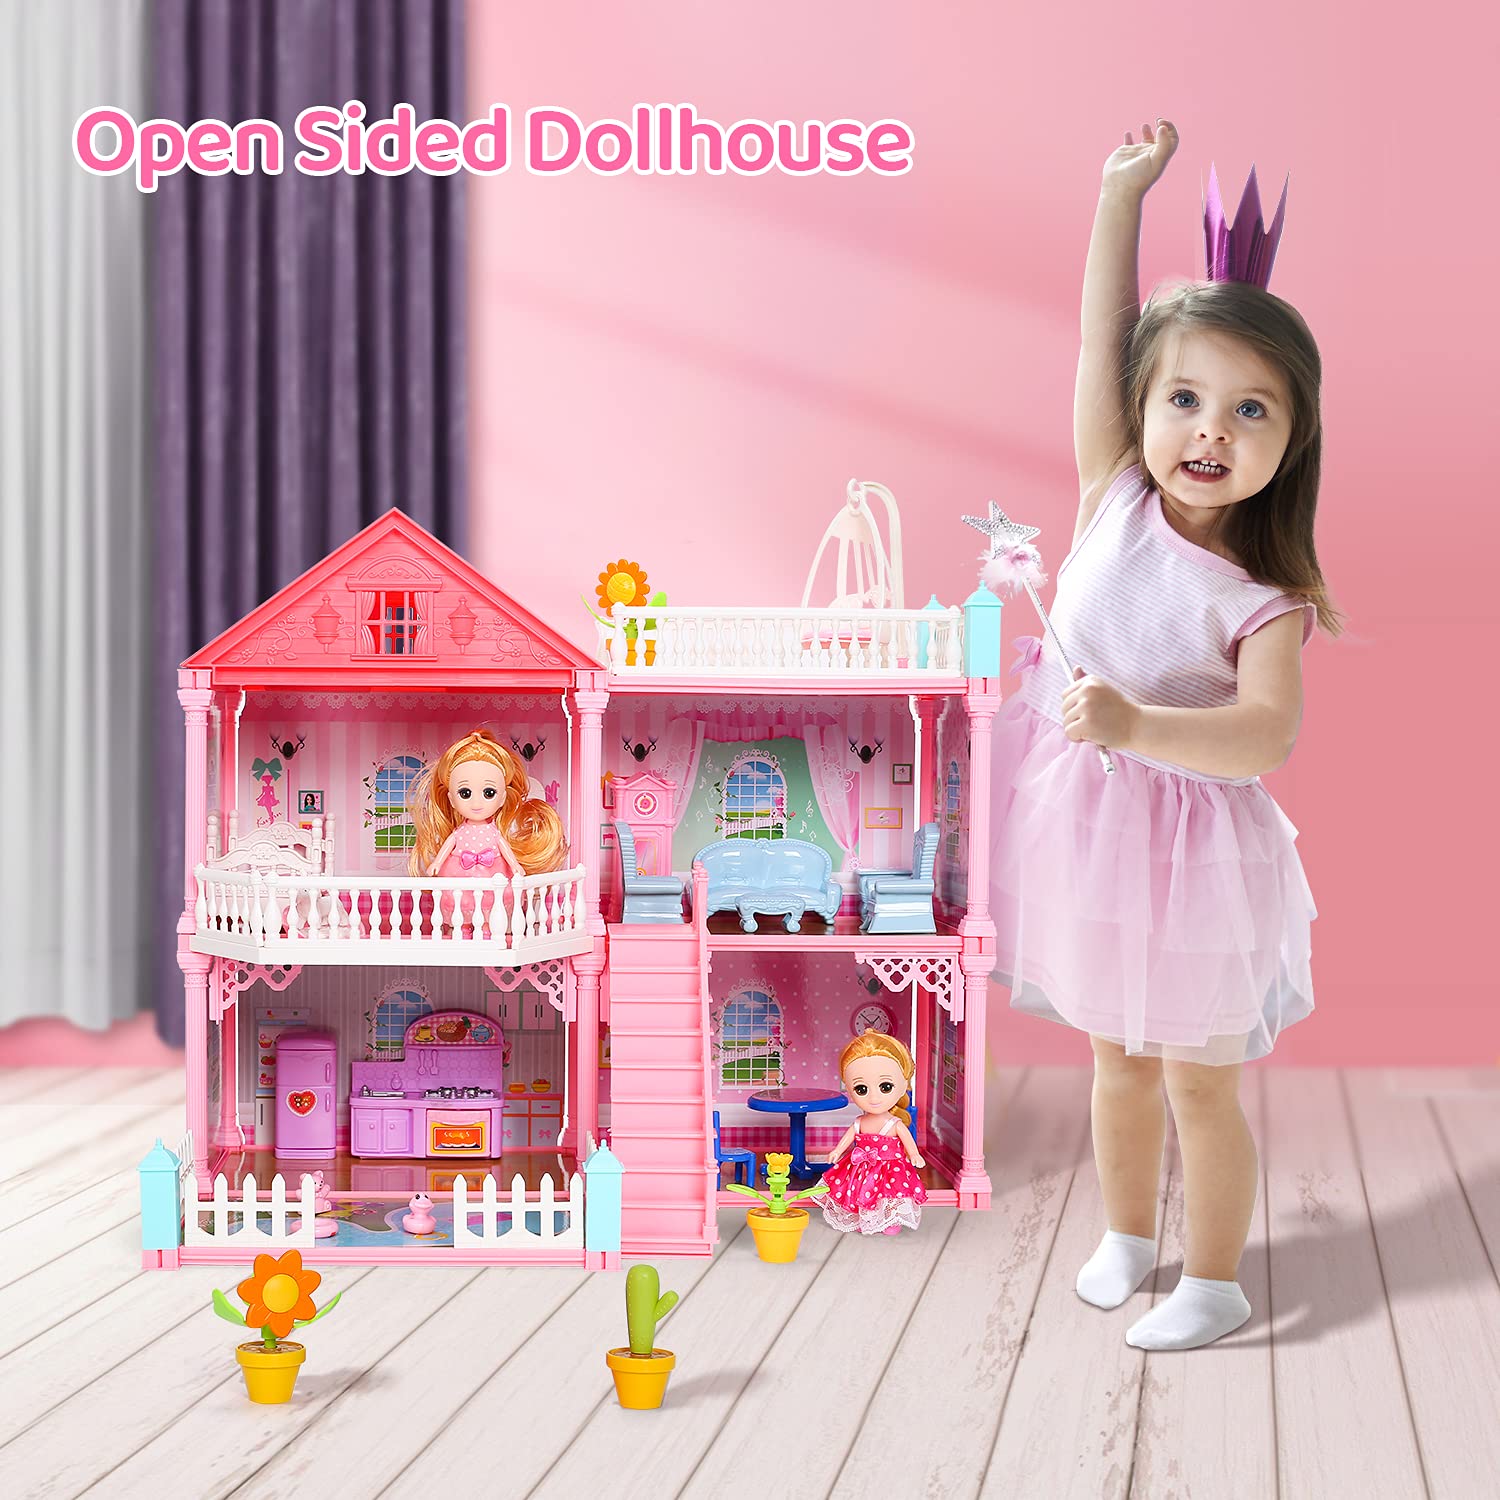 CUTE STONE Dollhouse with 2 Dolls, Flashing Lights, Furniture, Household Items and Gardening Tool Accessories, DIY Cottage Pretend Play Doll House, Gift for Ages 3+, 4 Rooms